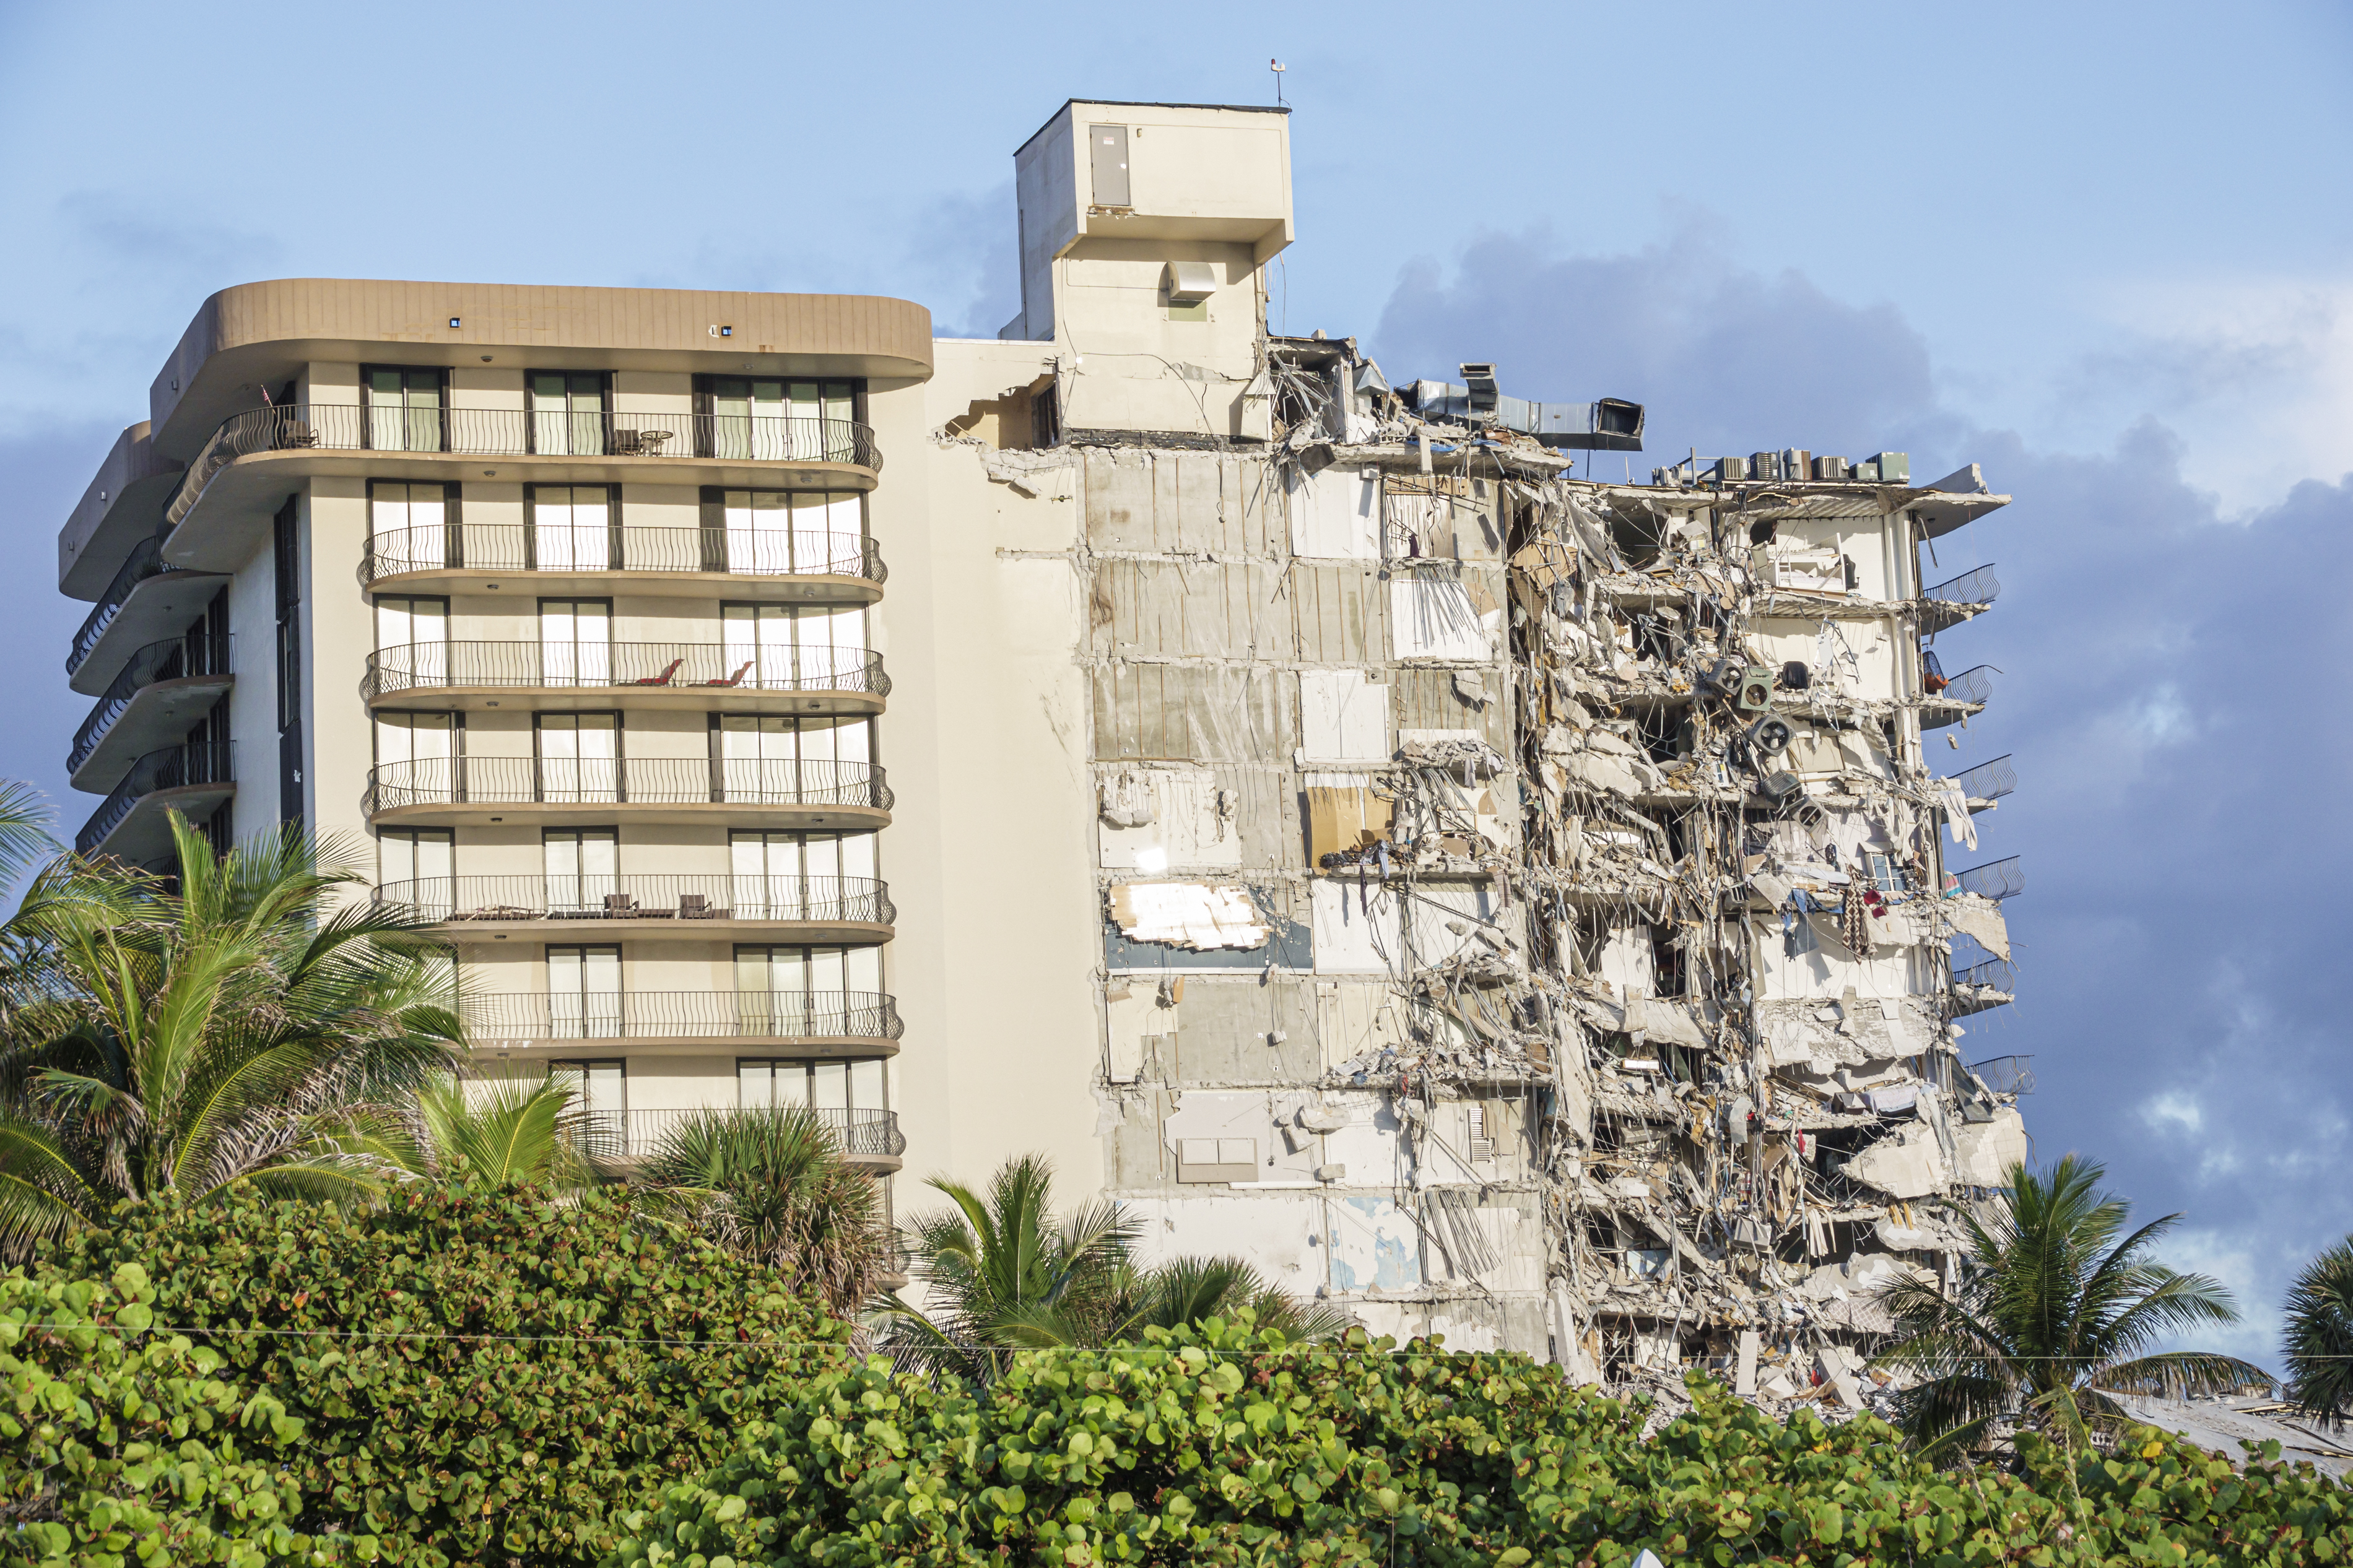 Surfside Commission Passes Ordinance That Shortens Building Inspections To 30 Years